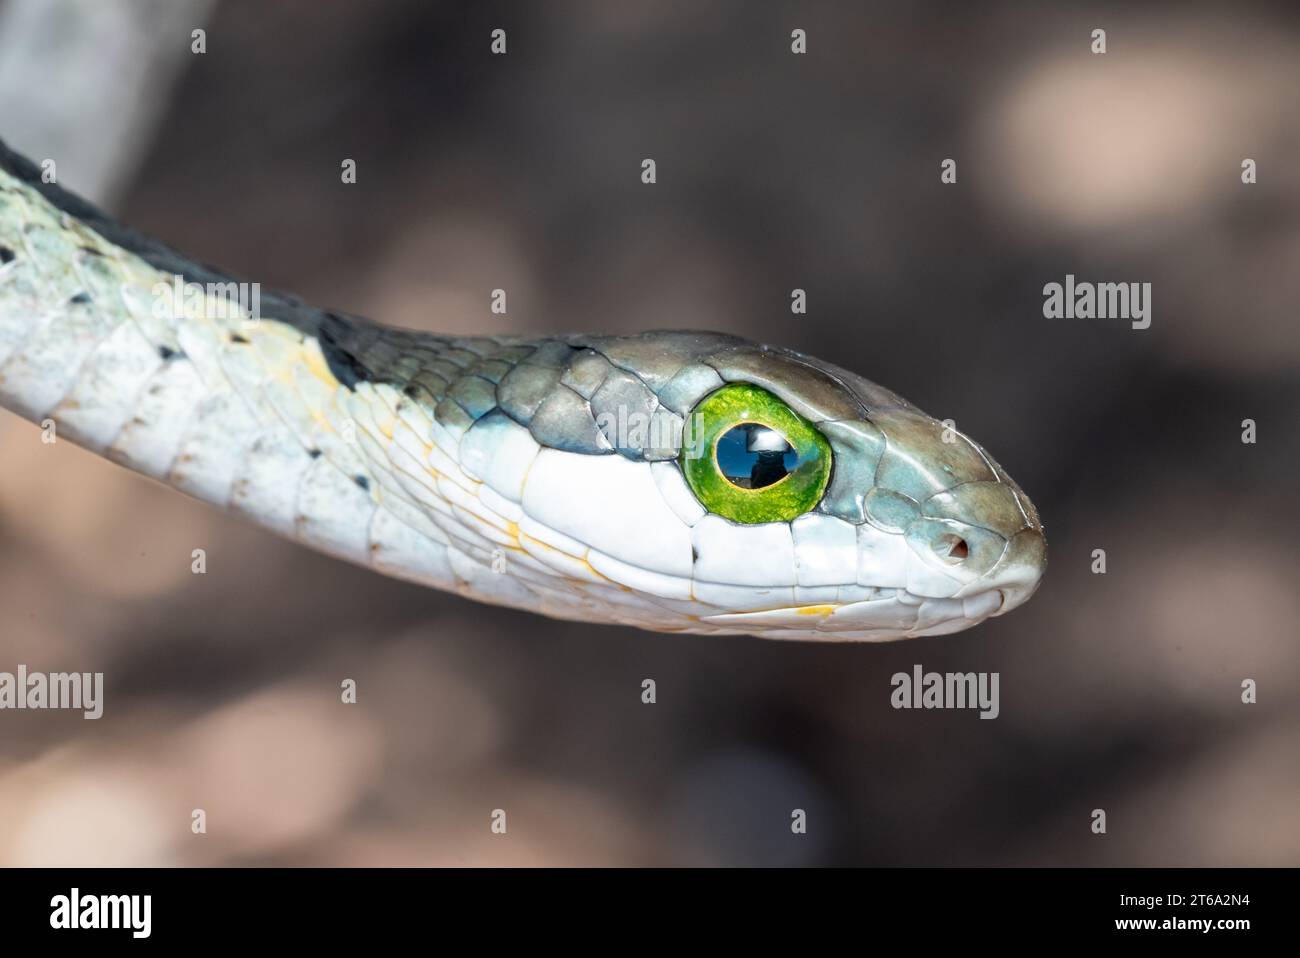 A small snake's head and beady green eyes, looking straight at the camera Stock Photo